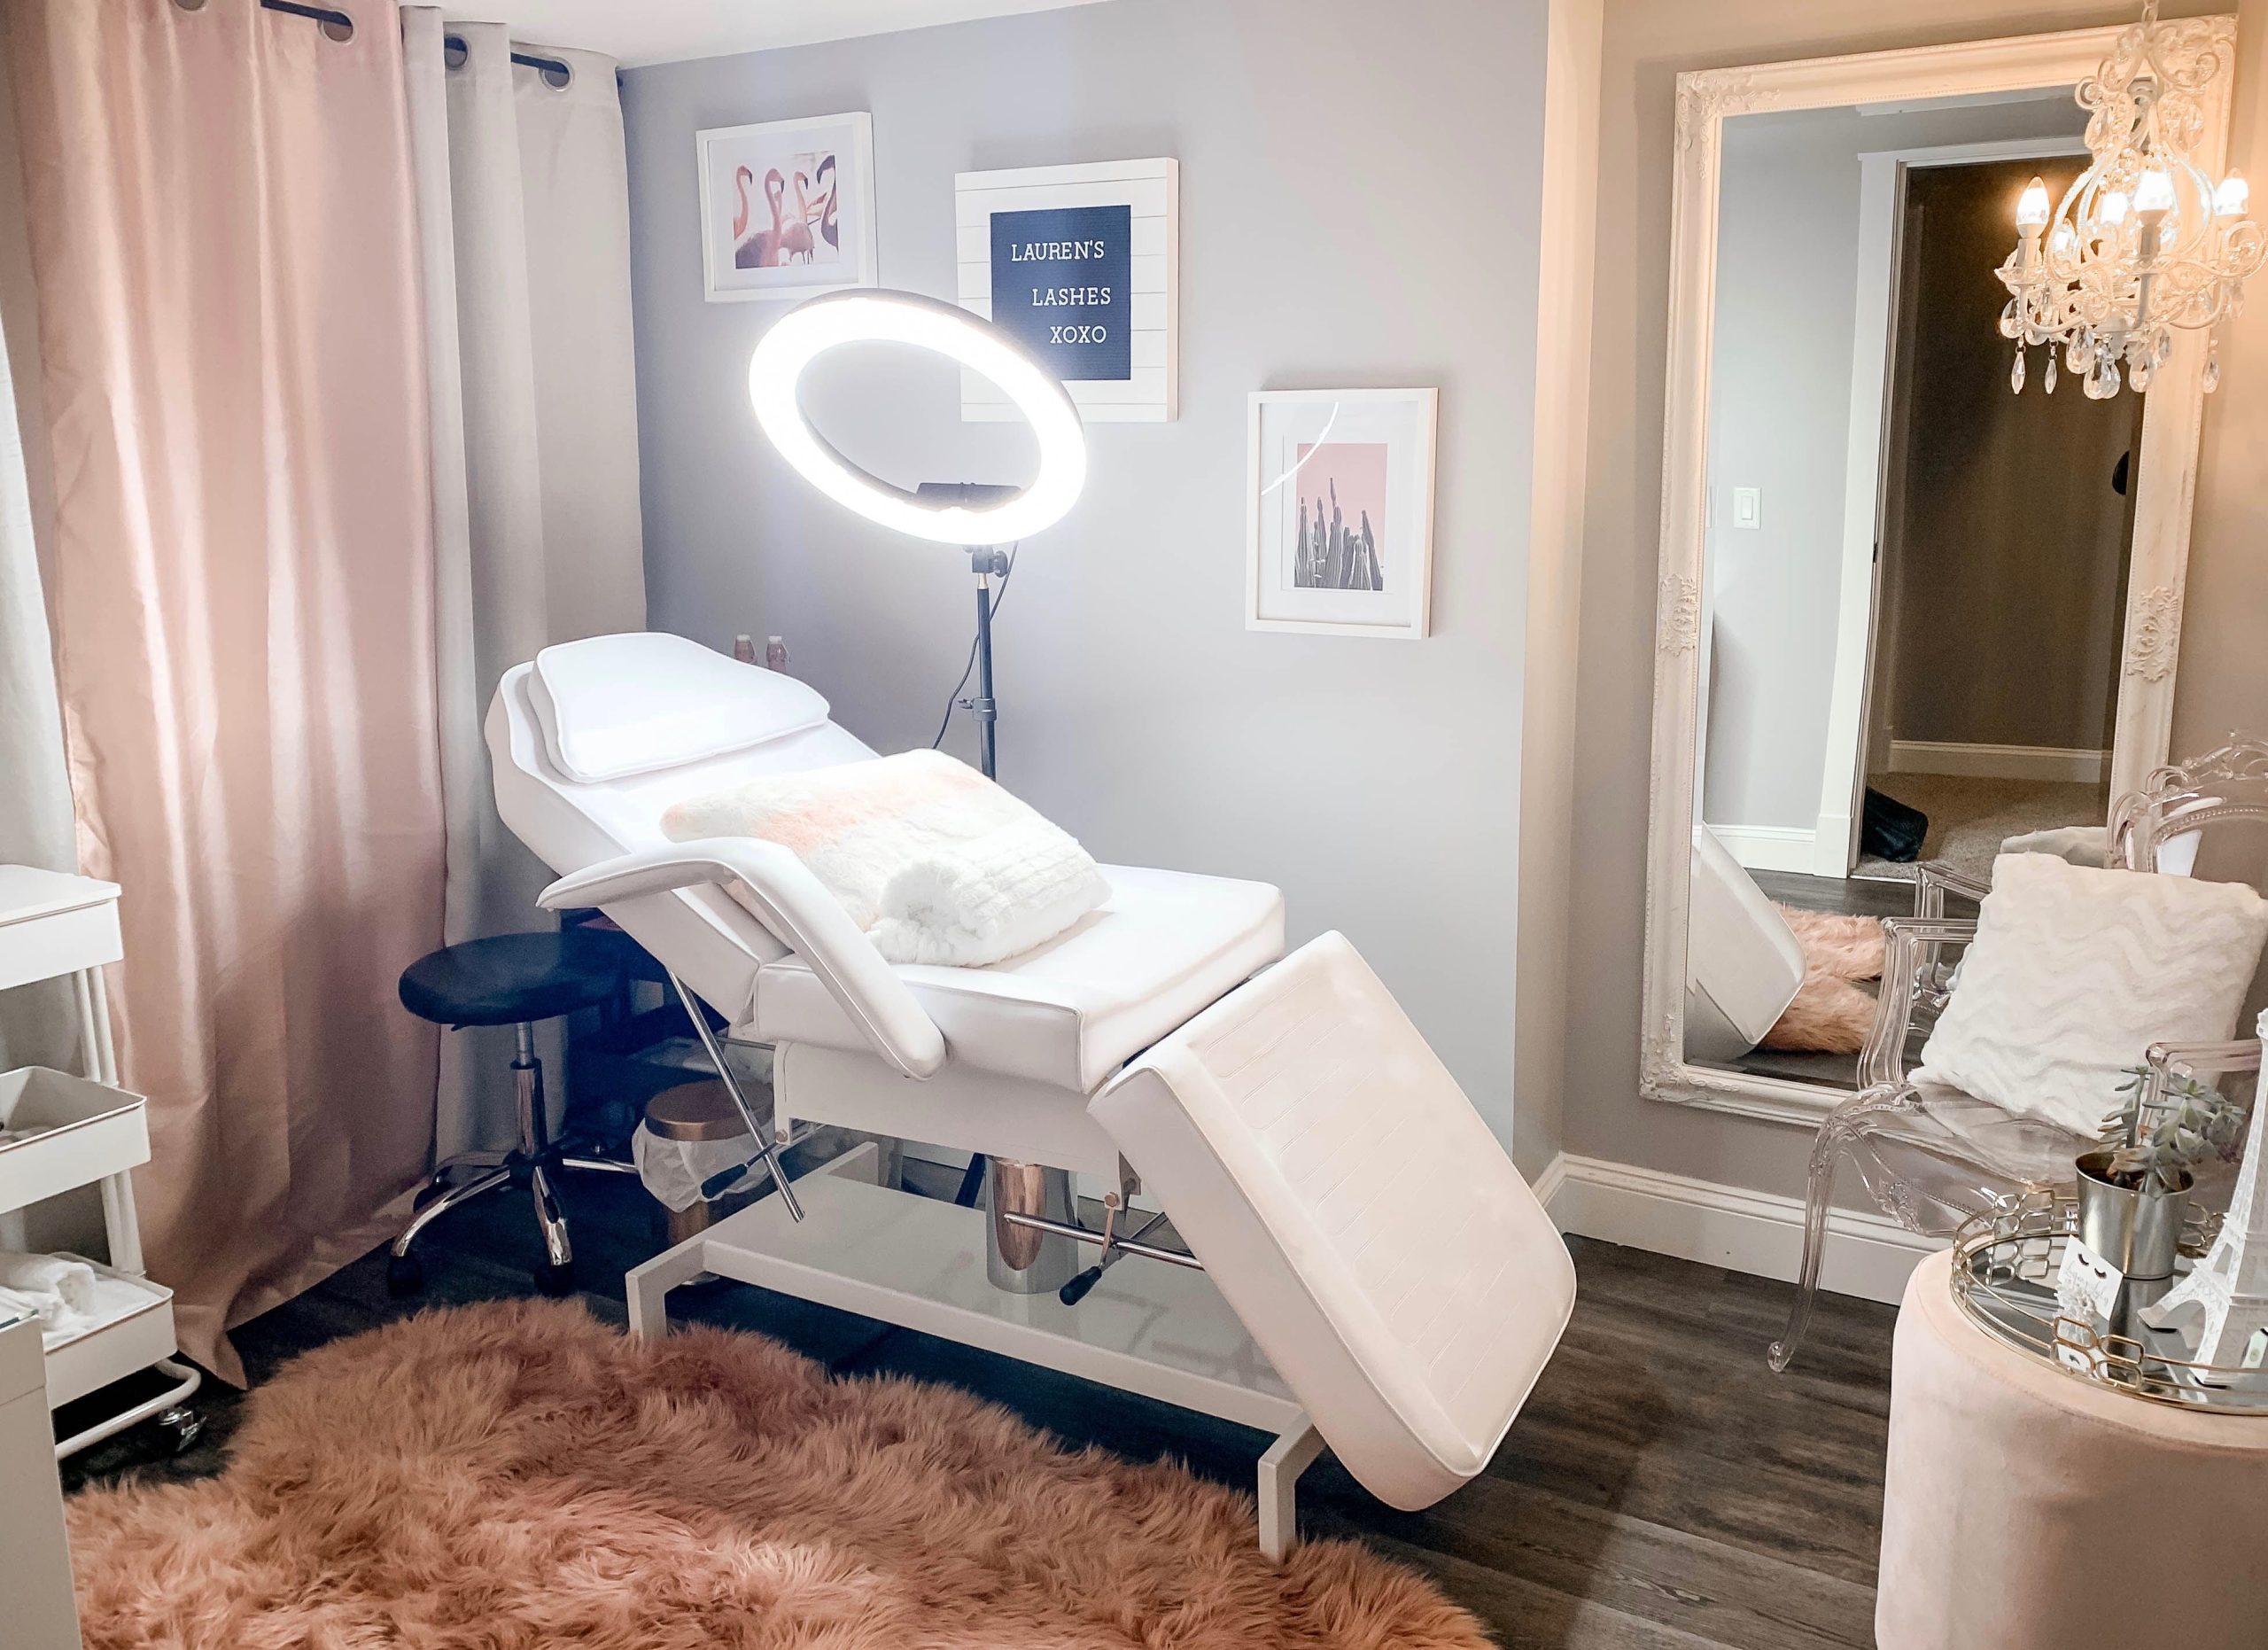 Elevate Your Practice: Why Every Masseuse Needs an Electric Adjustable Massage Table